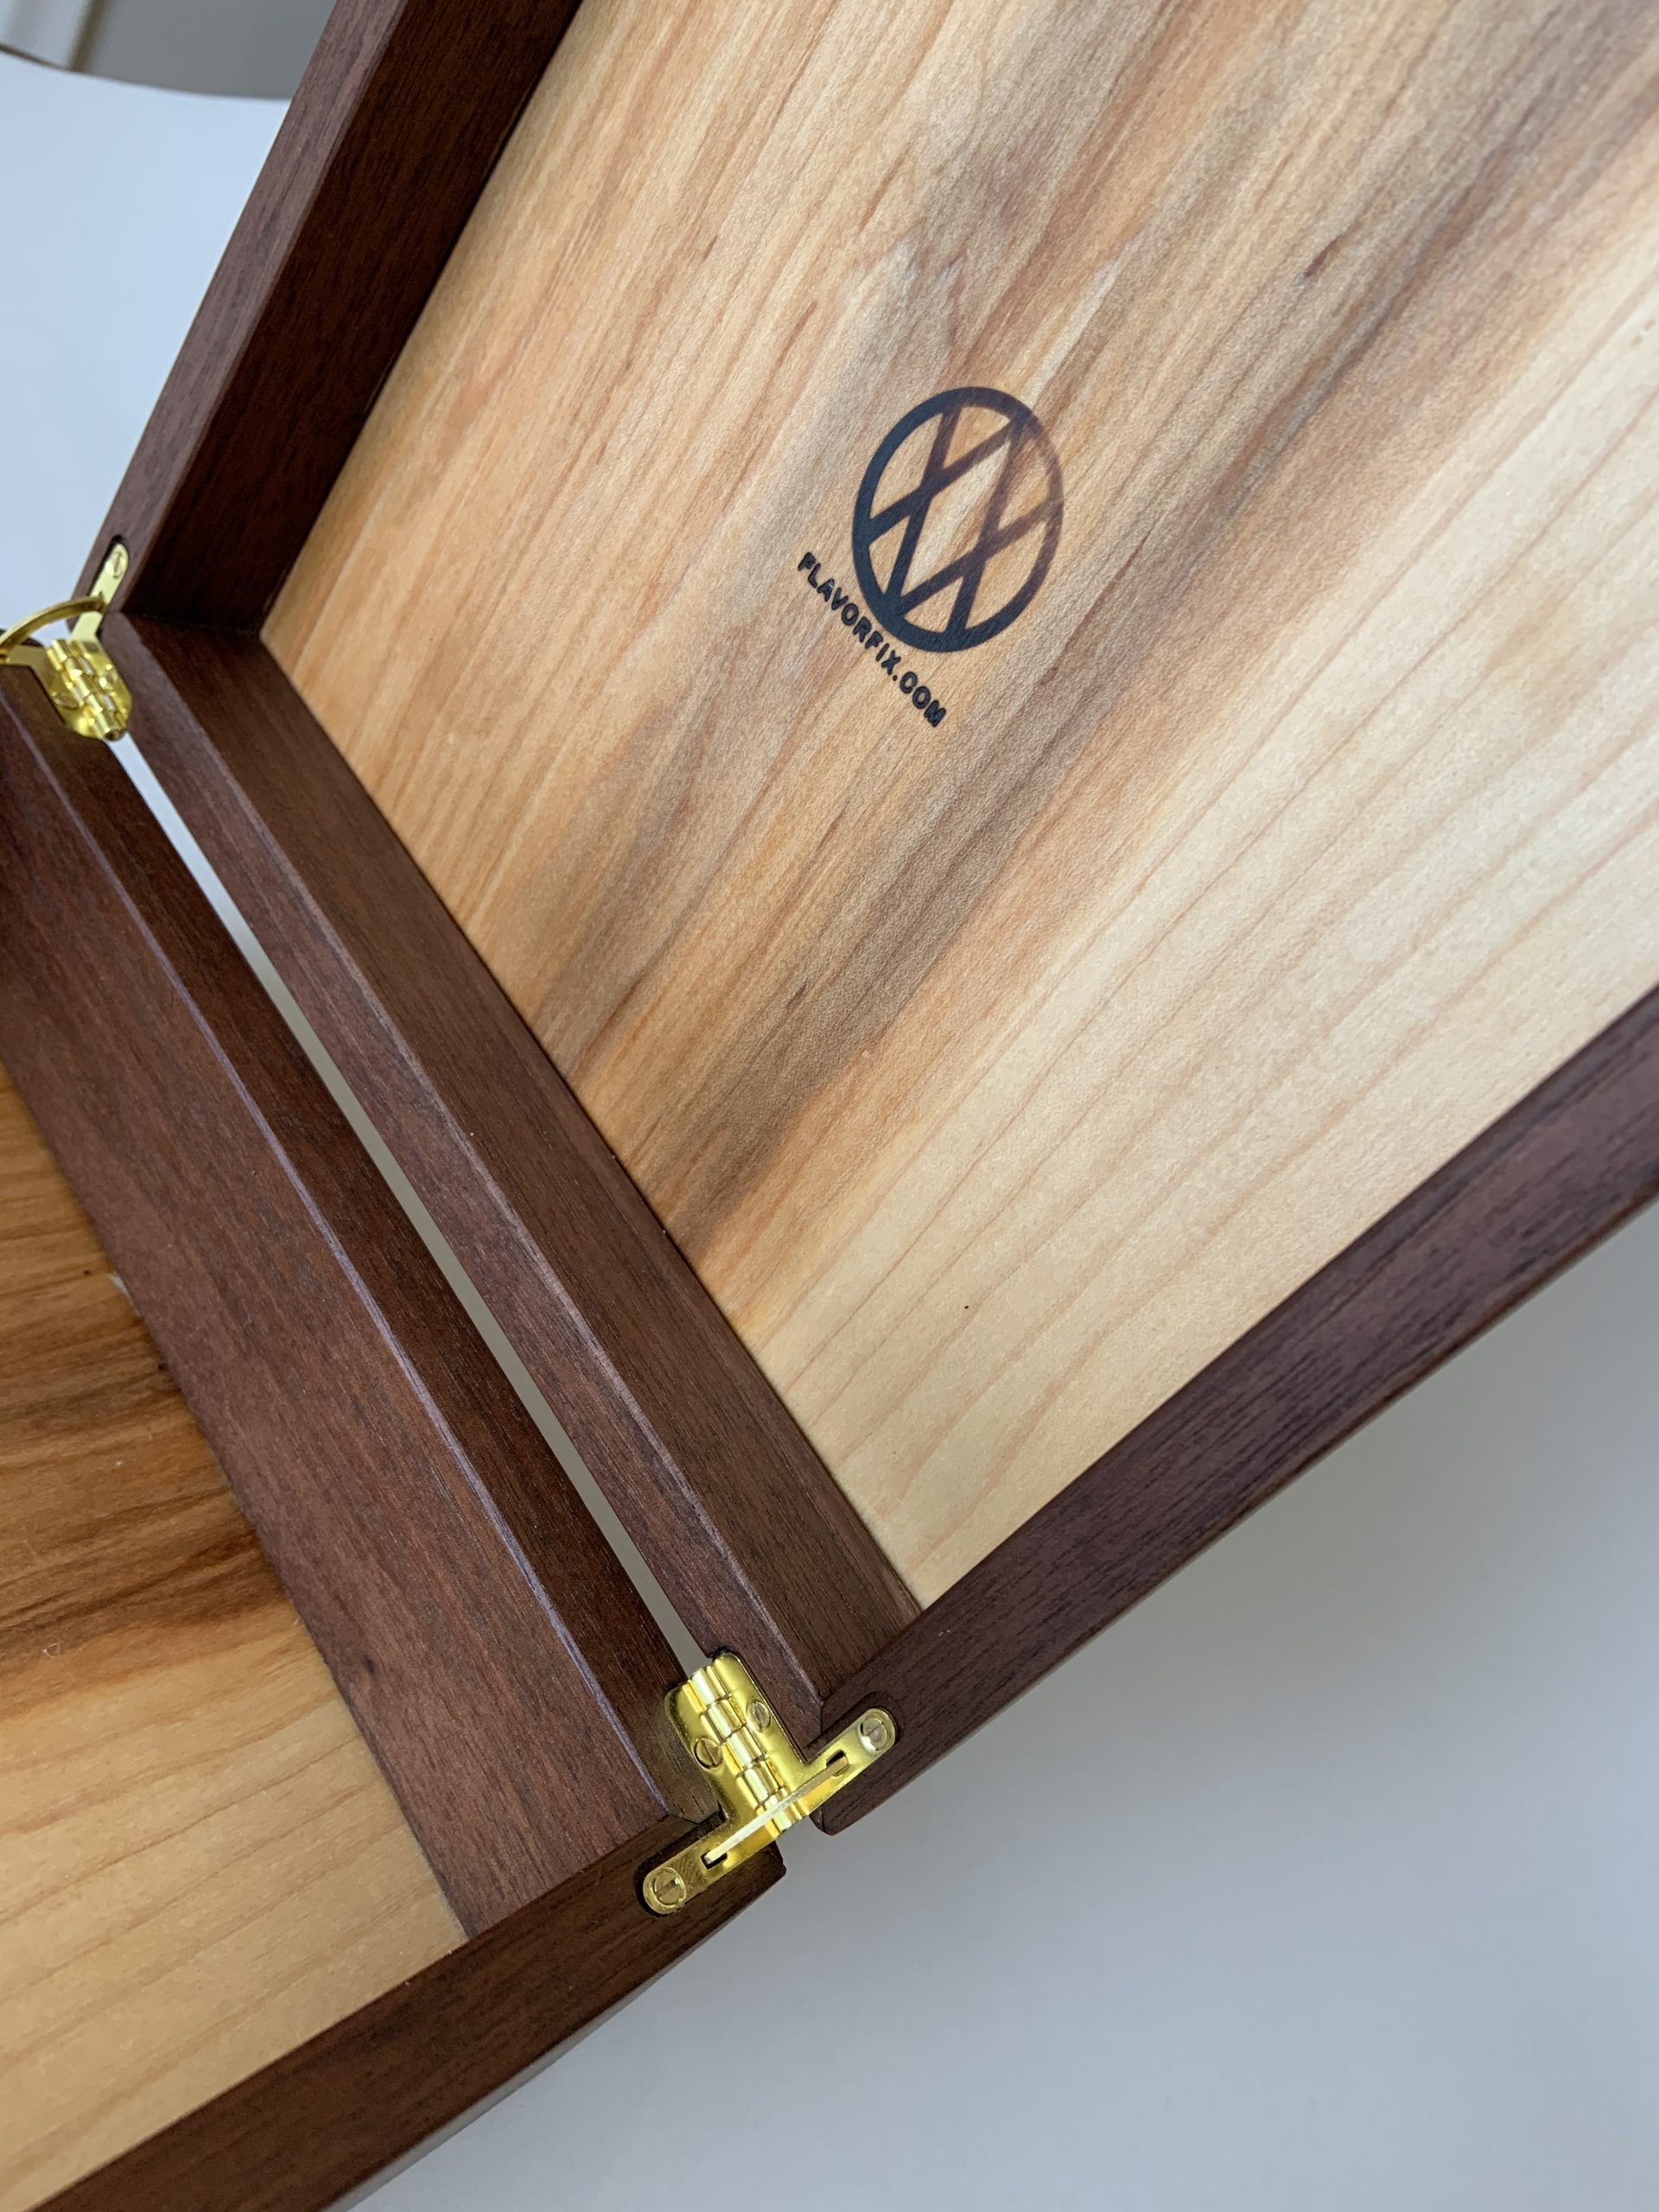 Wooden stash box inside latches